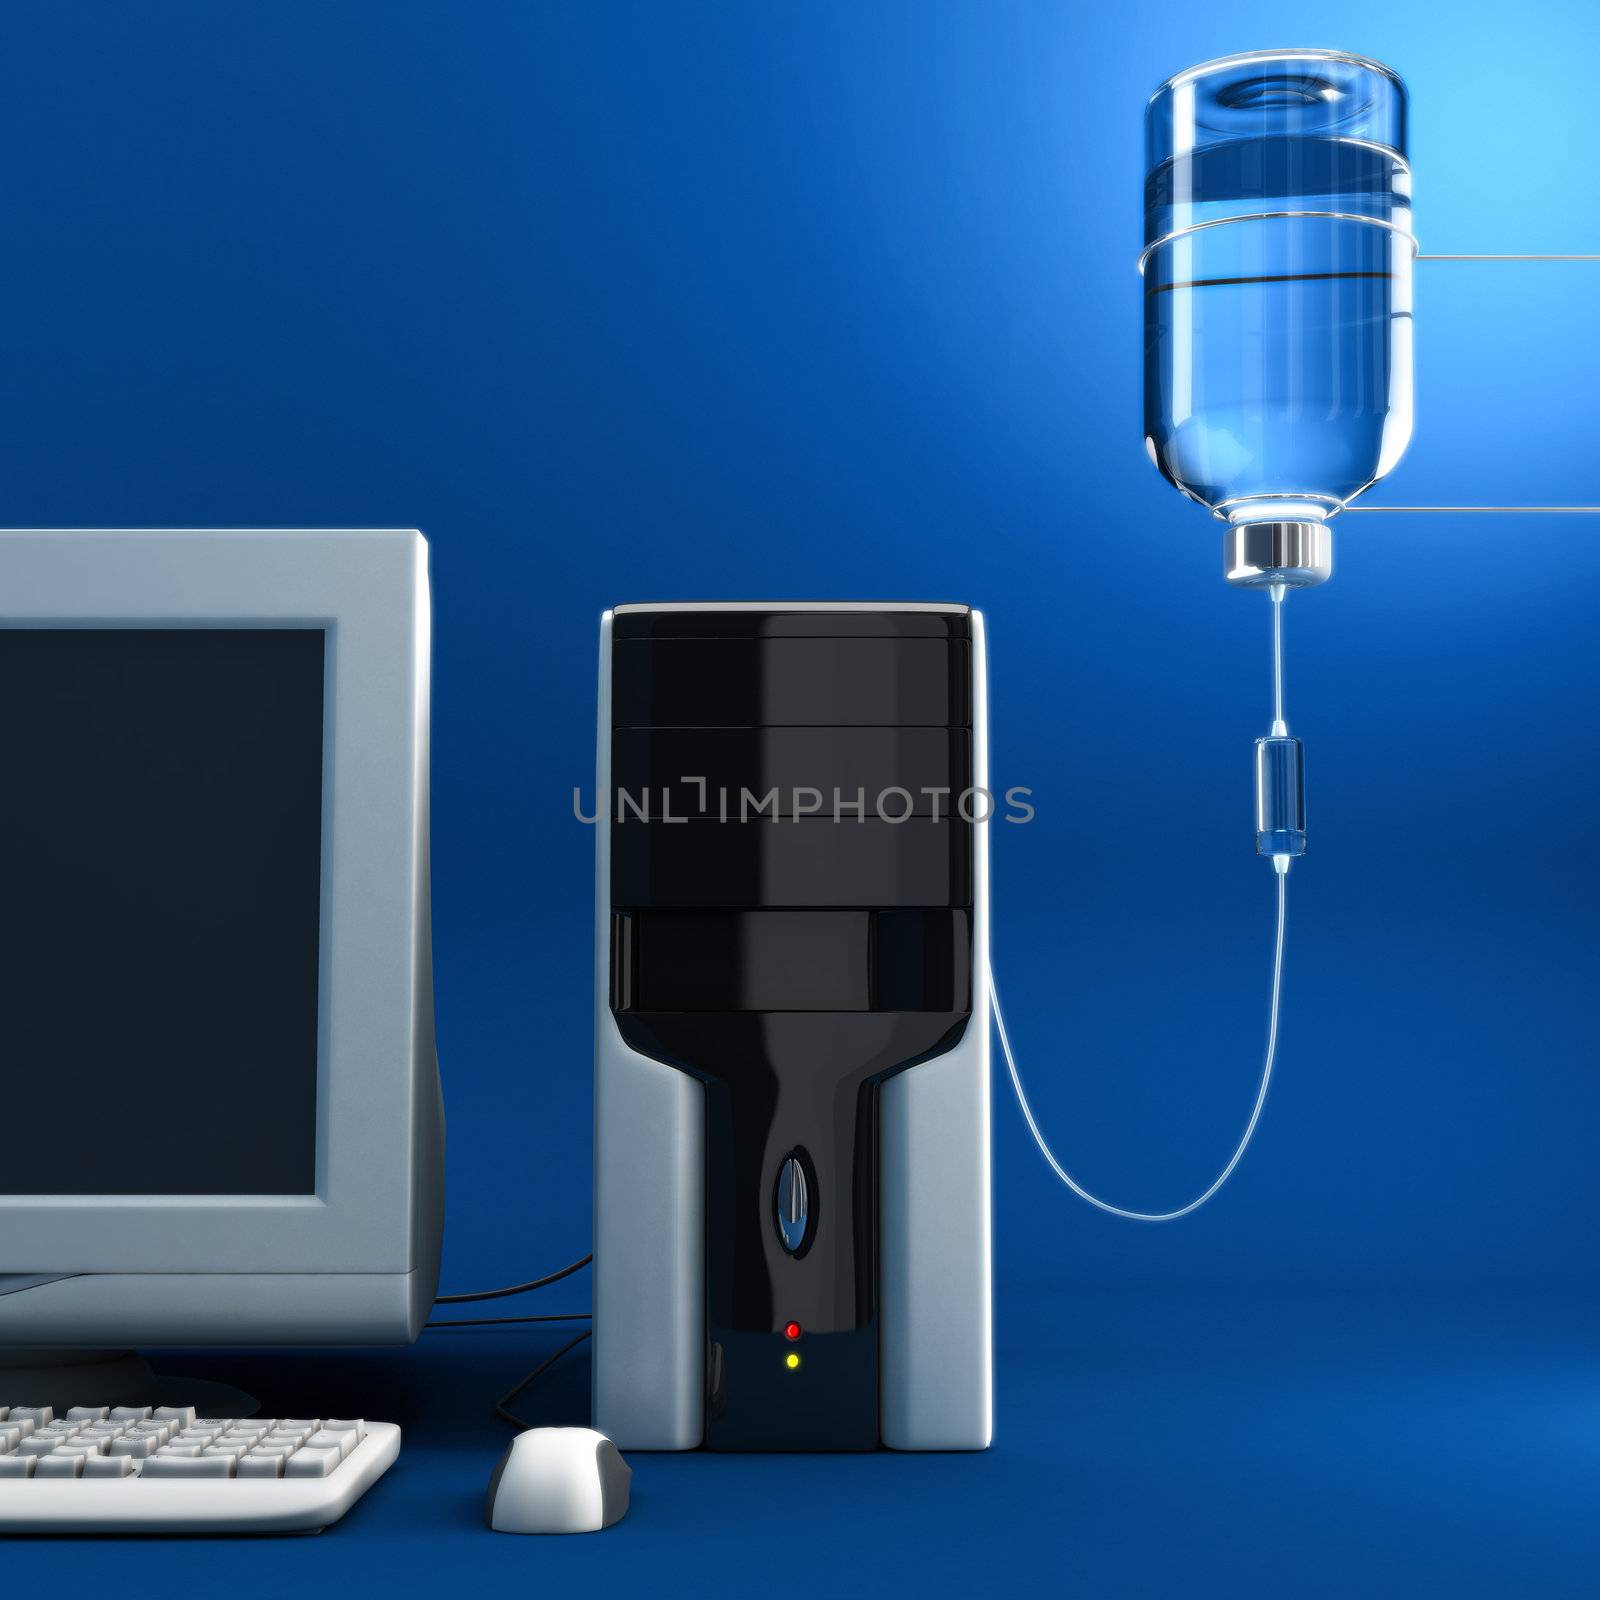 Serum to the old/sick computer. 3D illustration.. high resolution rendered..